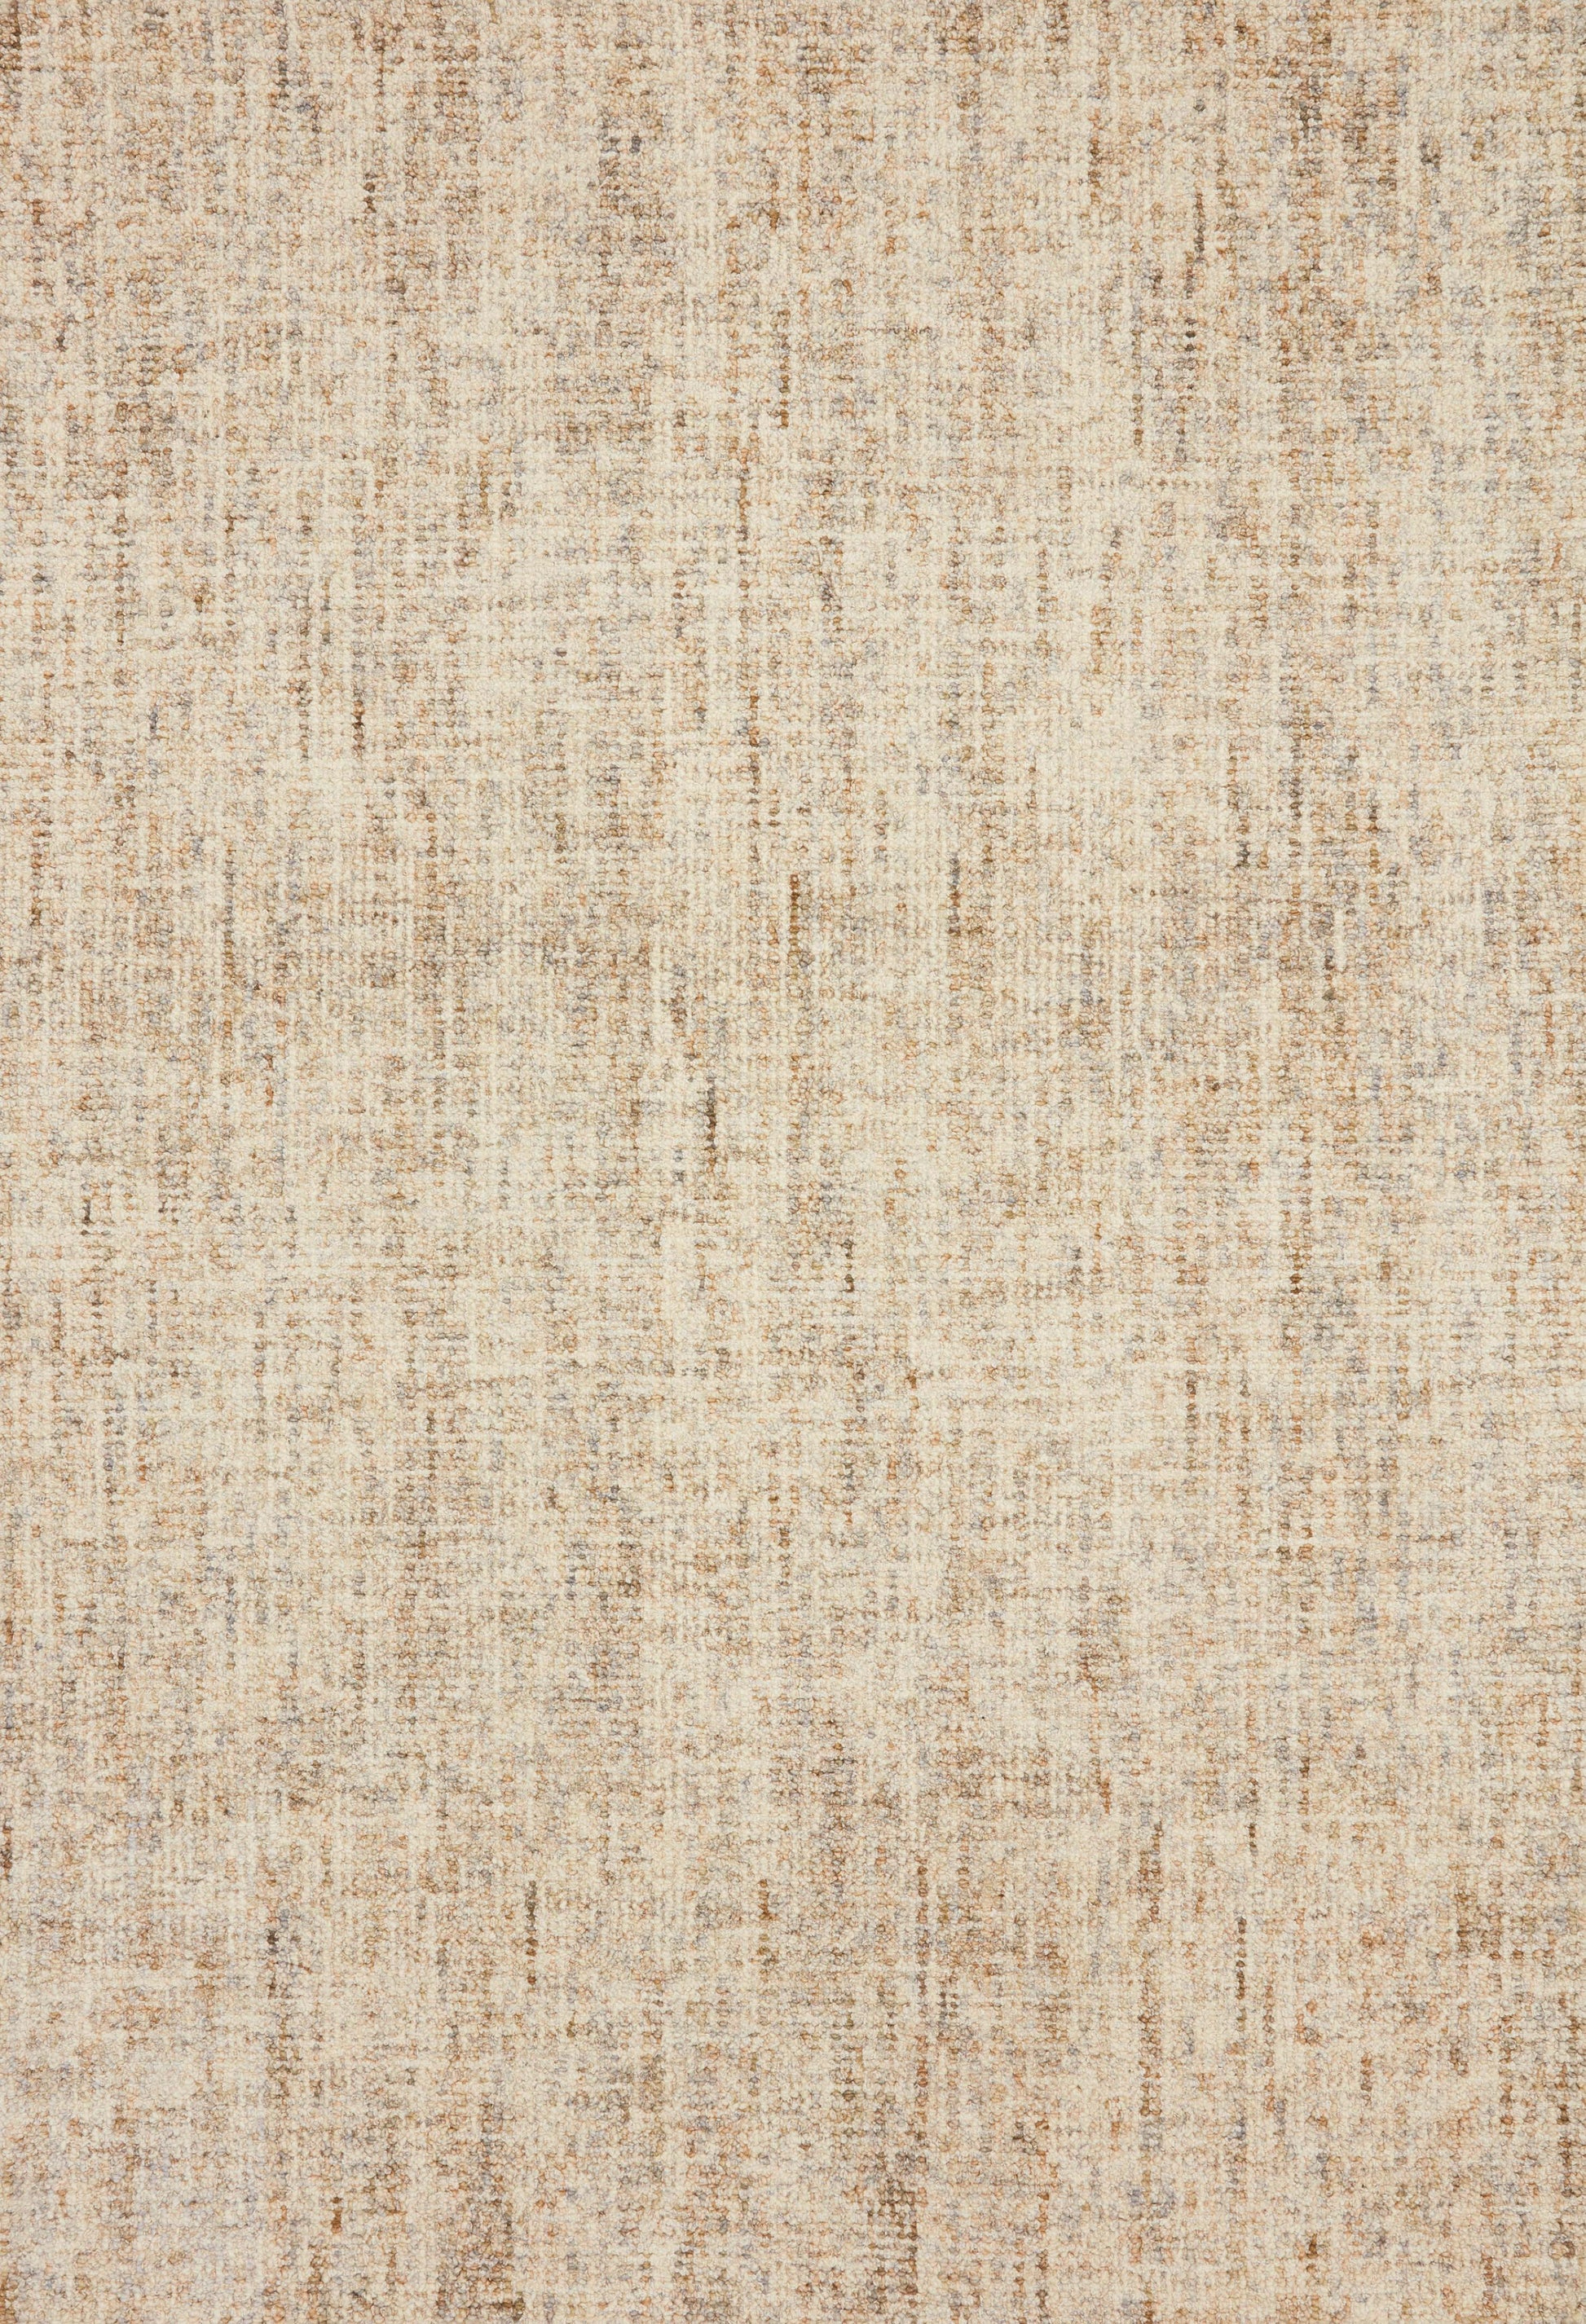 A picture of Loloi's Harlow rug, in style HLO-01, color Sand / Stone